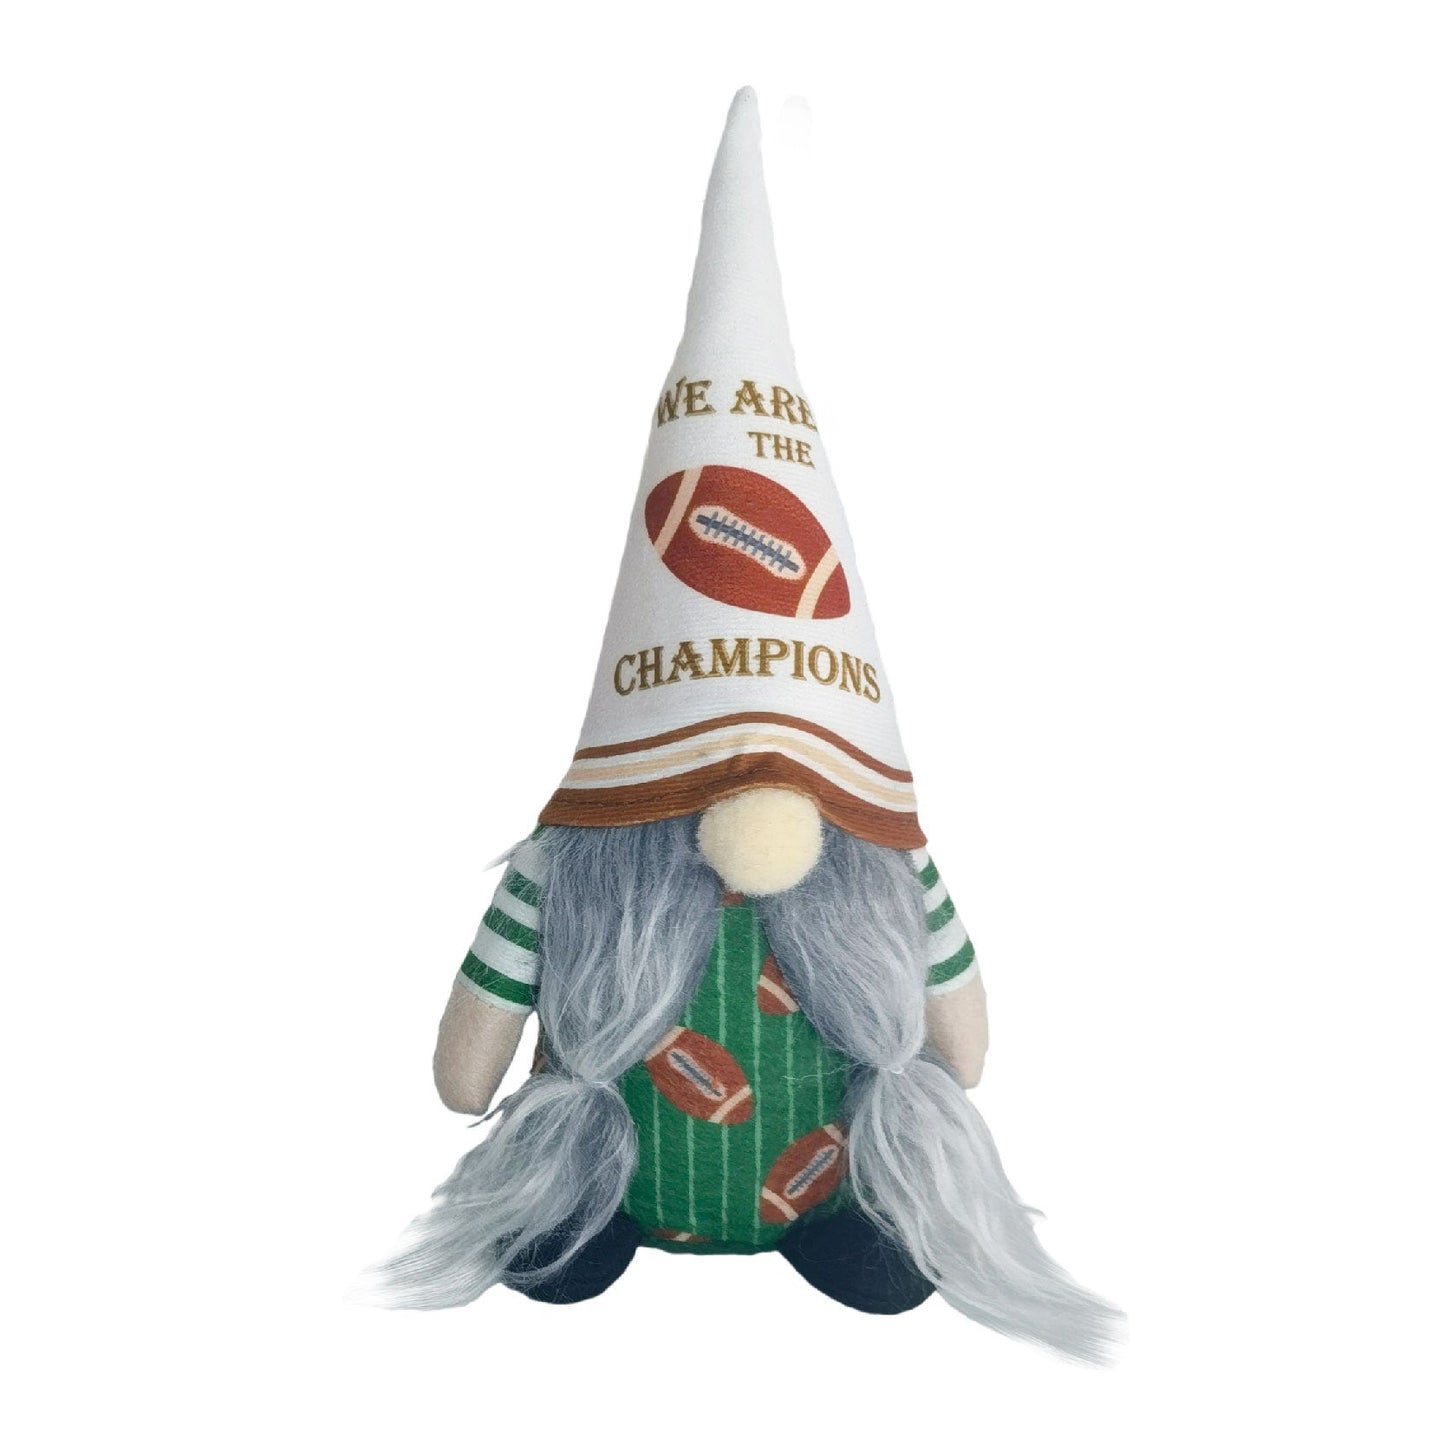 We Are The Champions Gnome